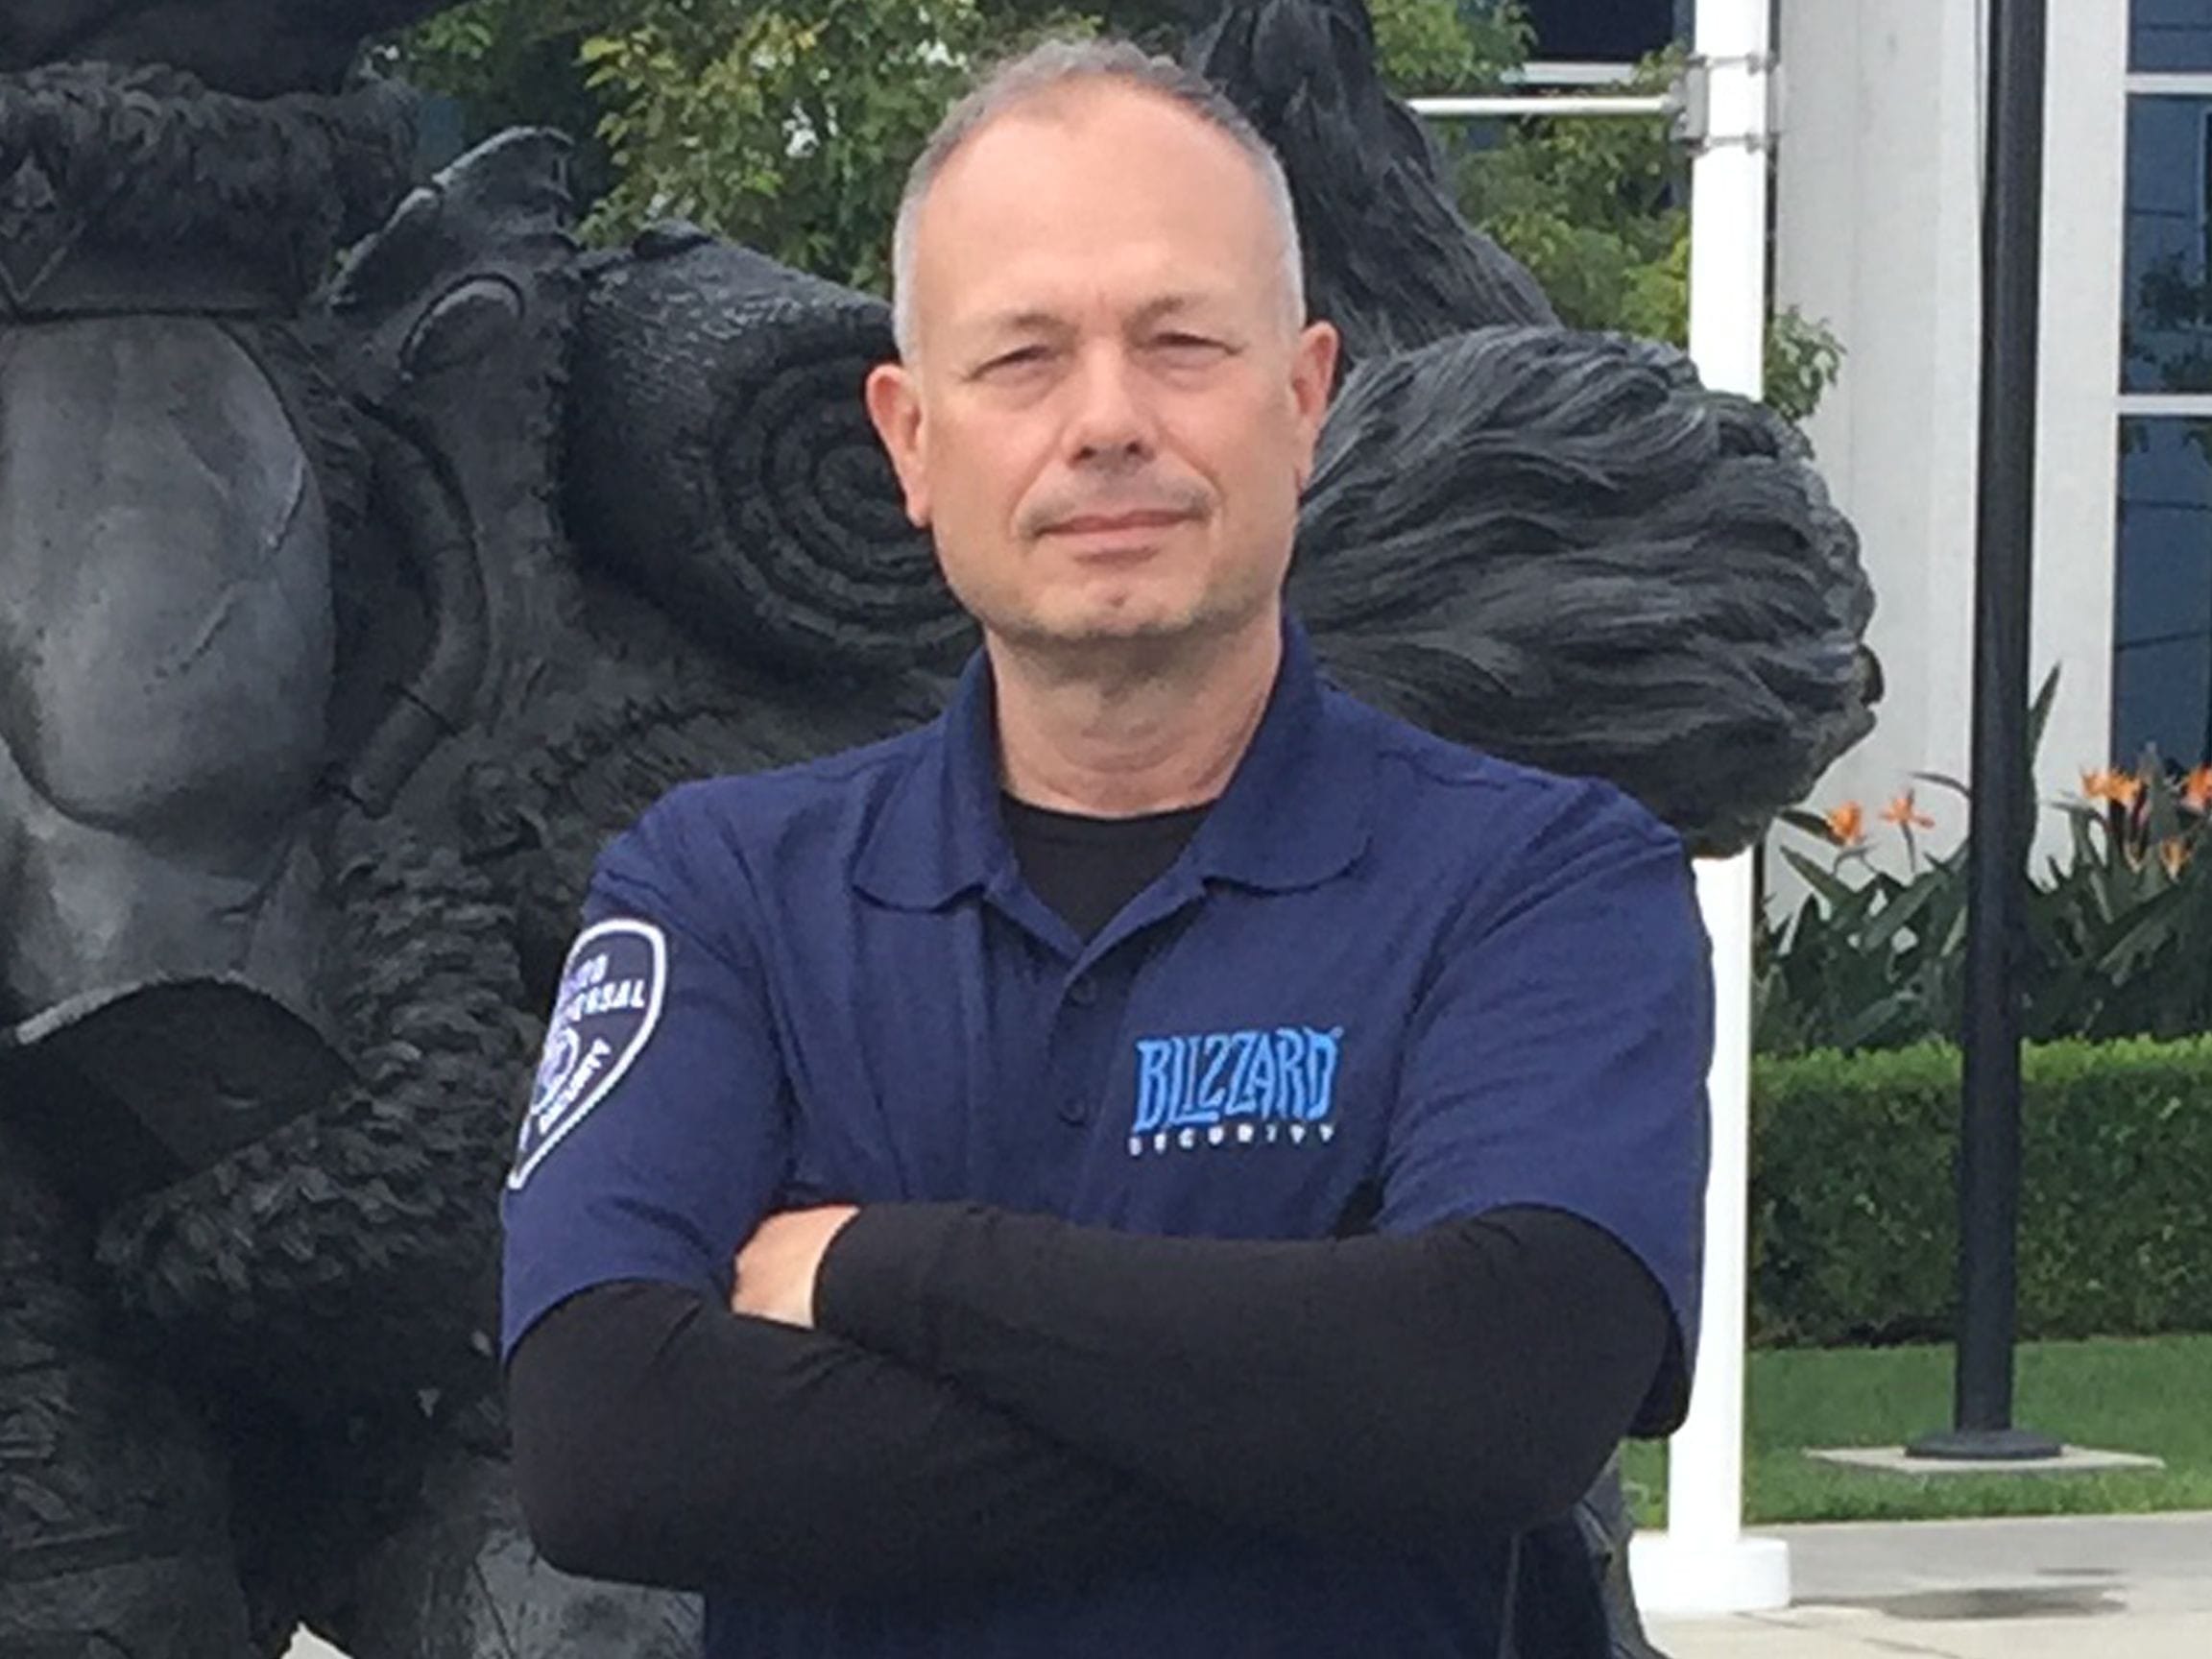 Although Blizzard Entertainment is the largest gaming company in the world, Jim's position as Post Commander was no game keeping everyone safe at their HQ.